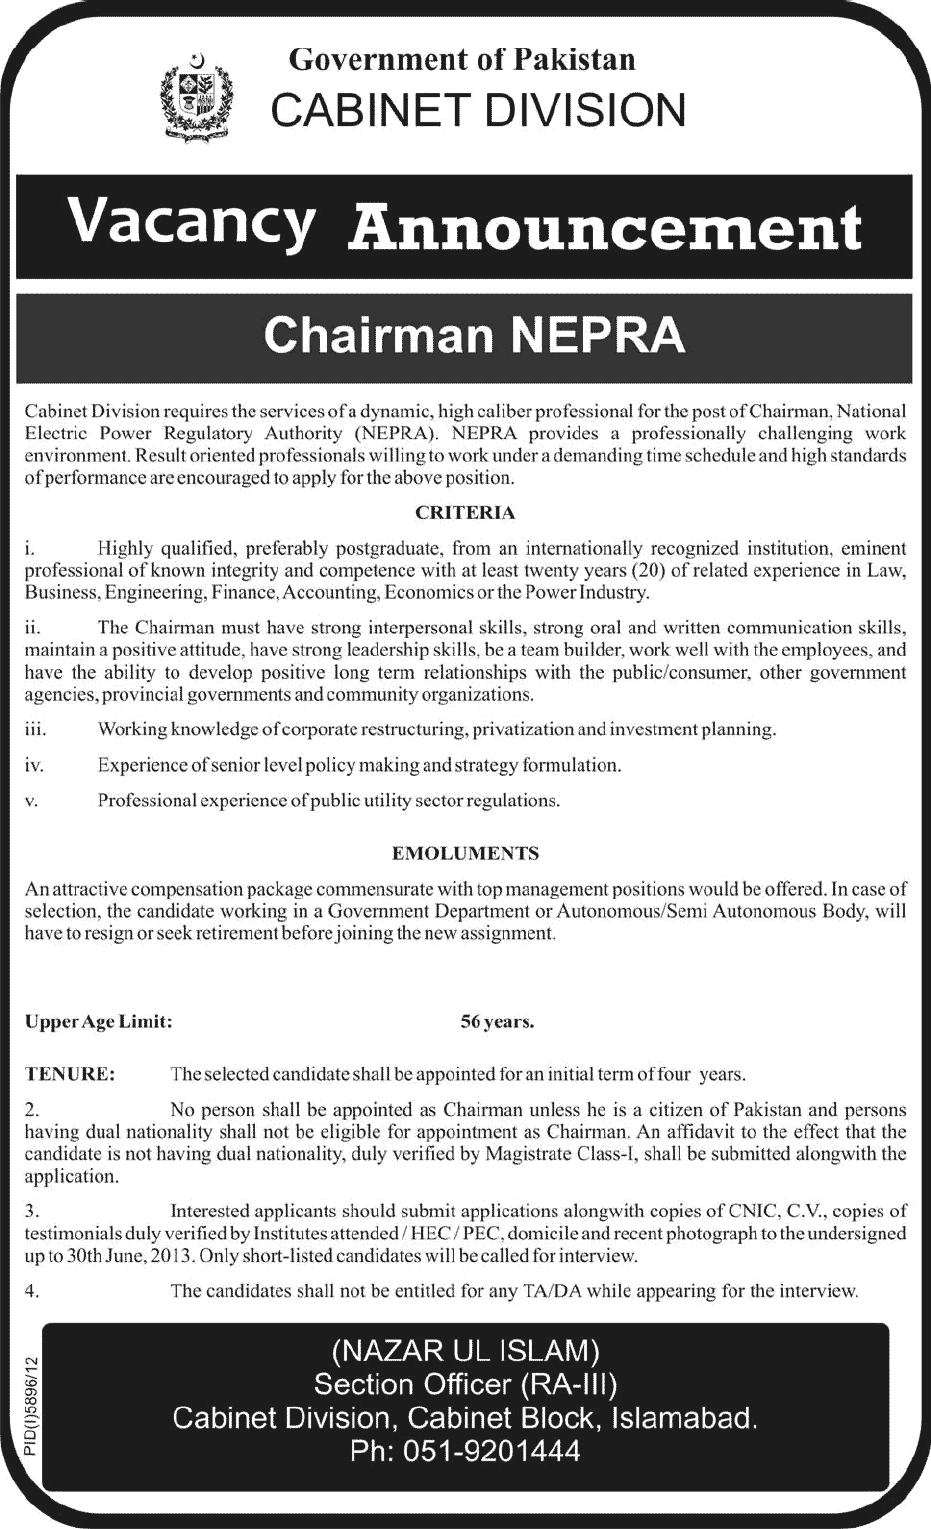 National Electric Power Regulatory Authority (NEPRA) Job for Chairman 2013 June through Cabinet Division